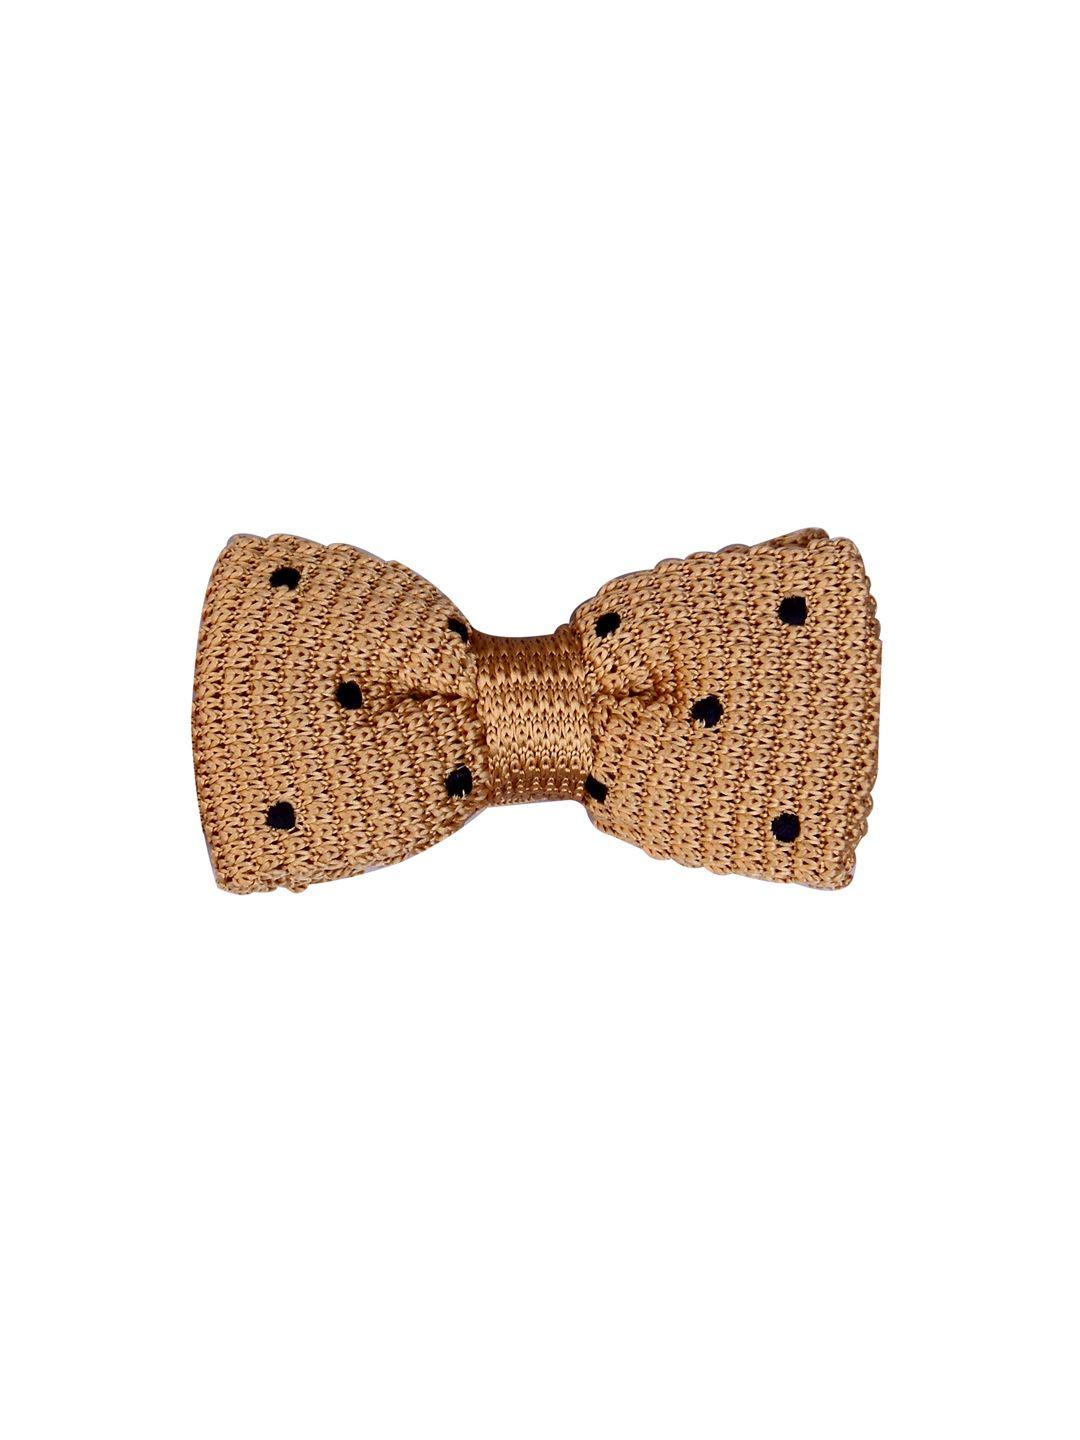 tossido brown woven design bow tie